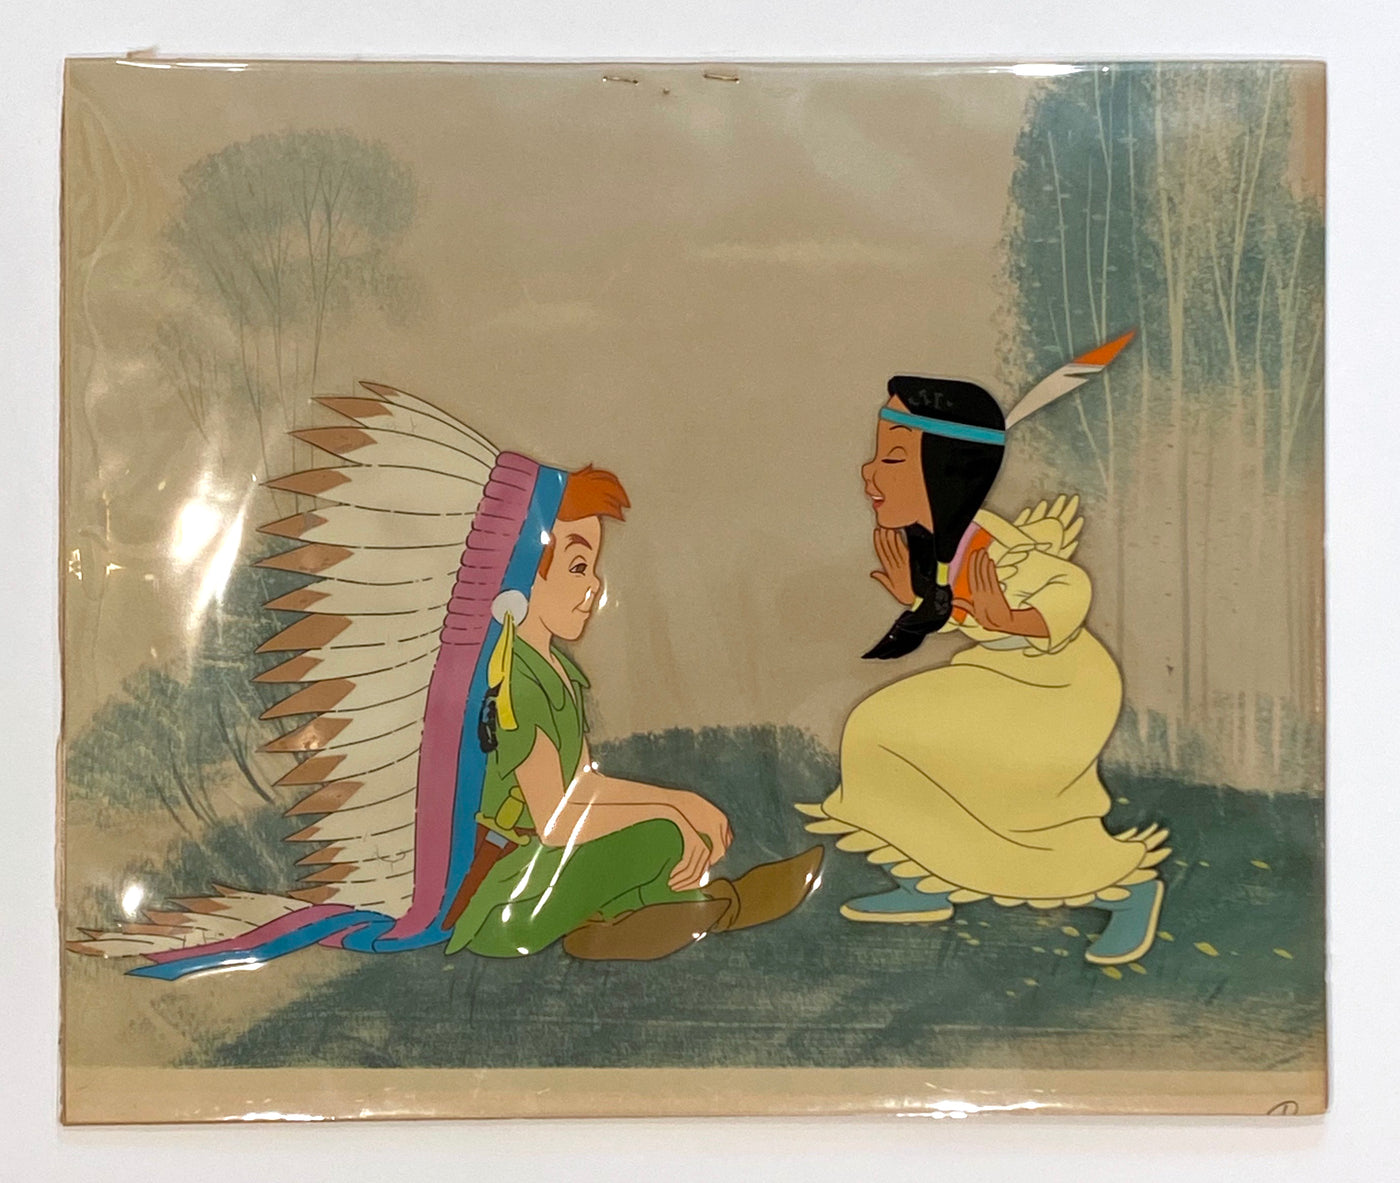 Original Walt Disney Production Cel featuring Tiger Lily, Great Big Little Panther, and Peter Pan